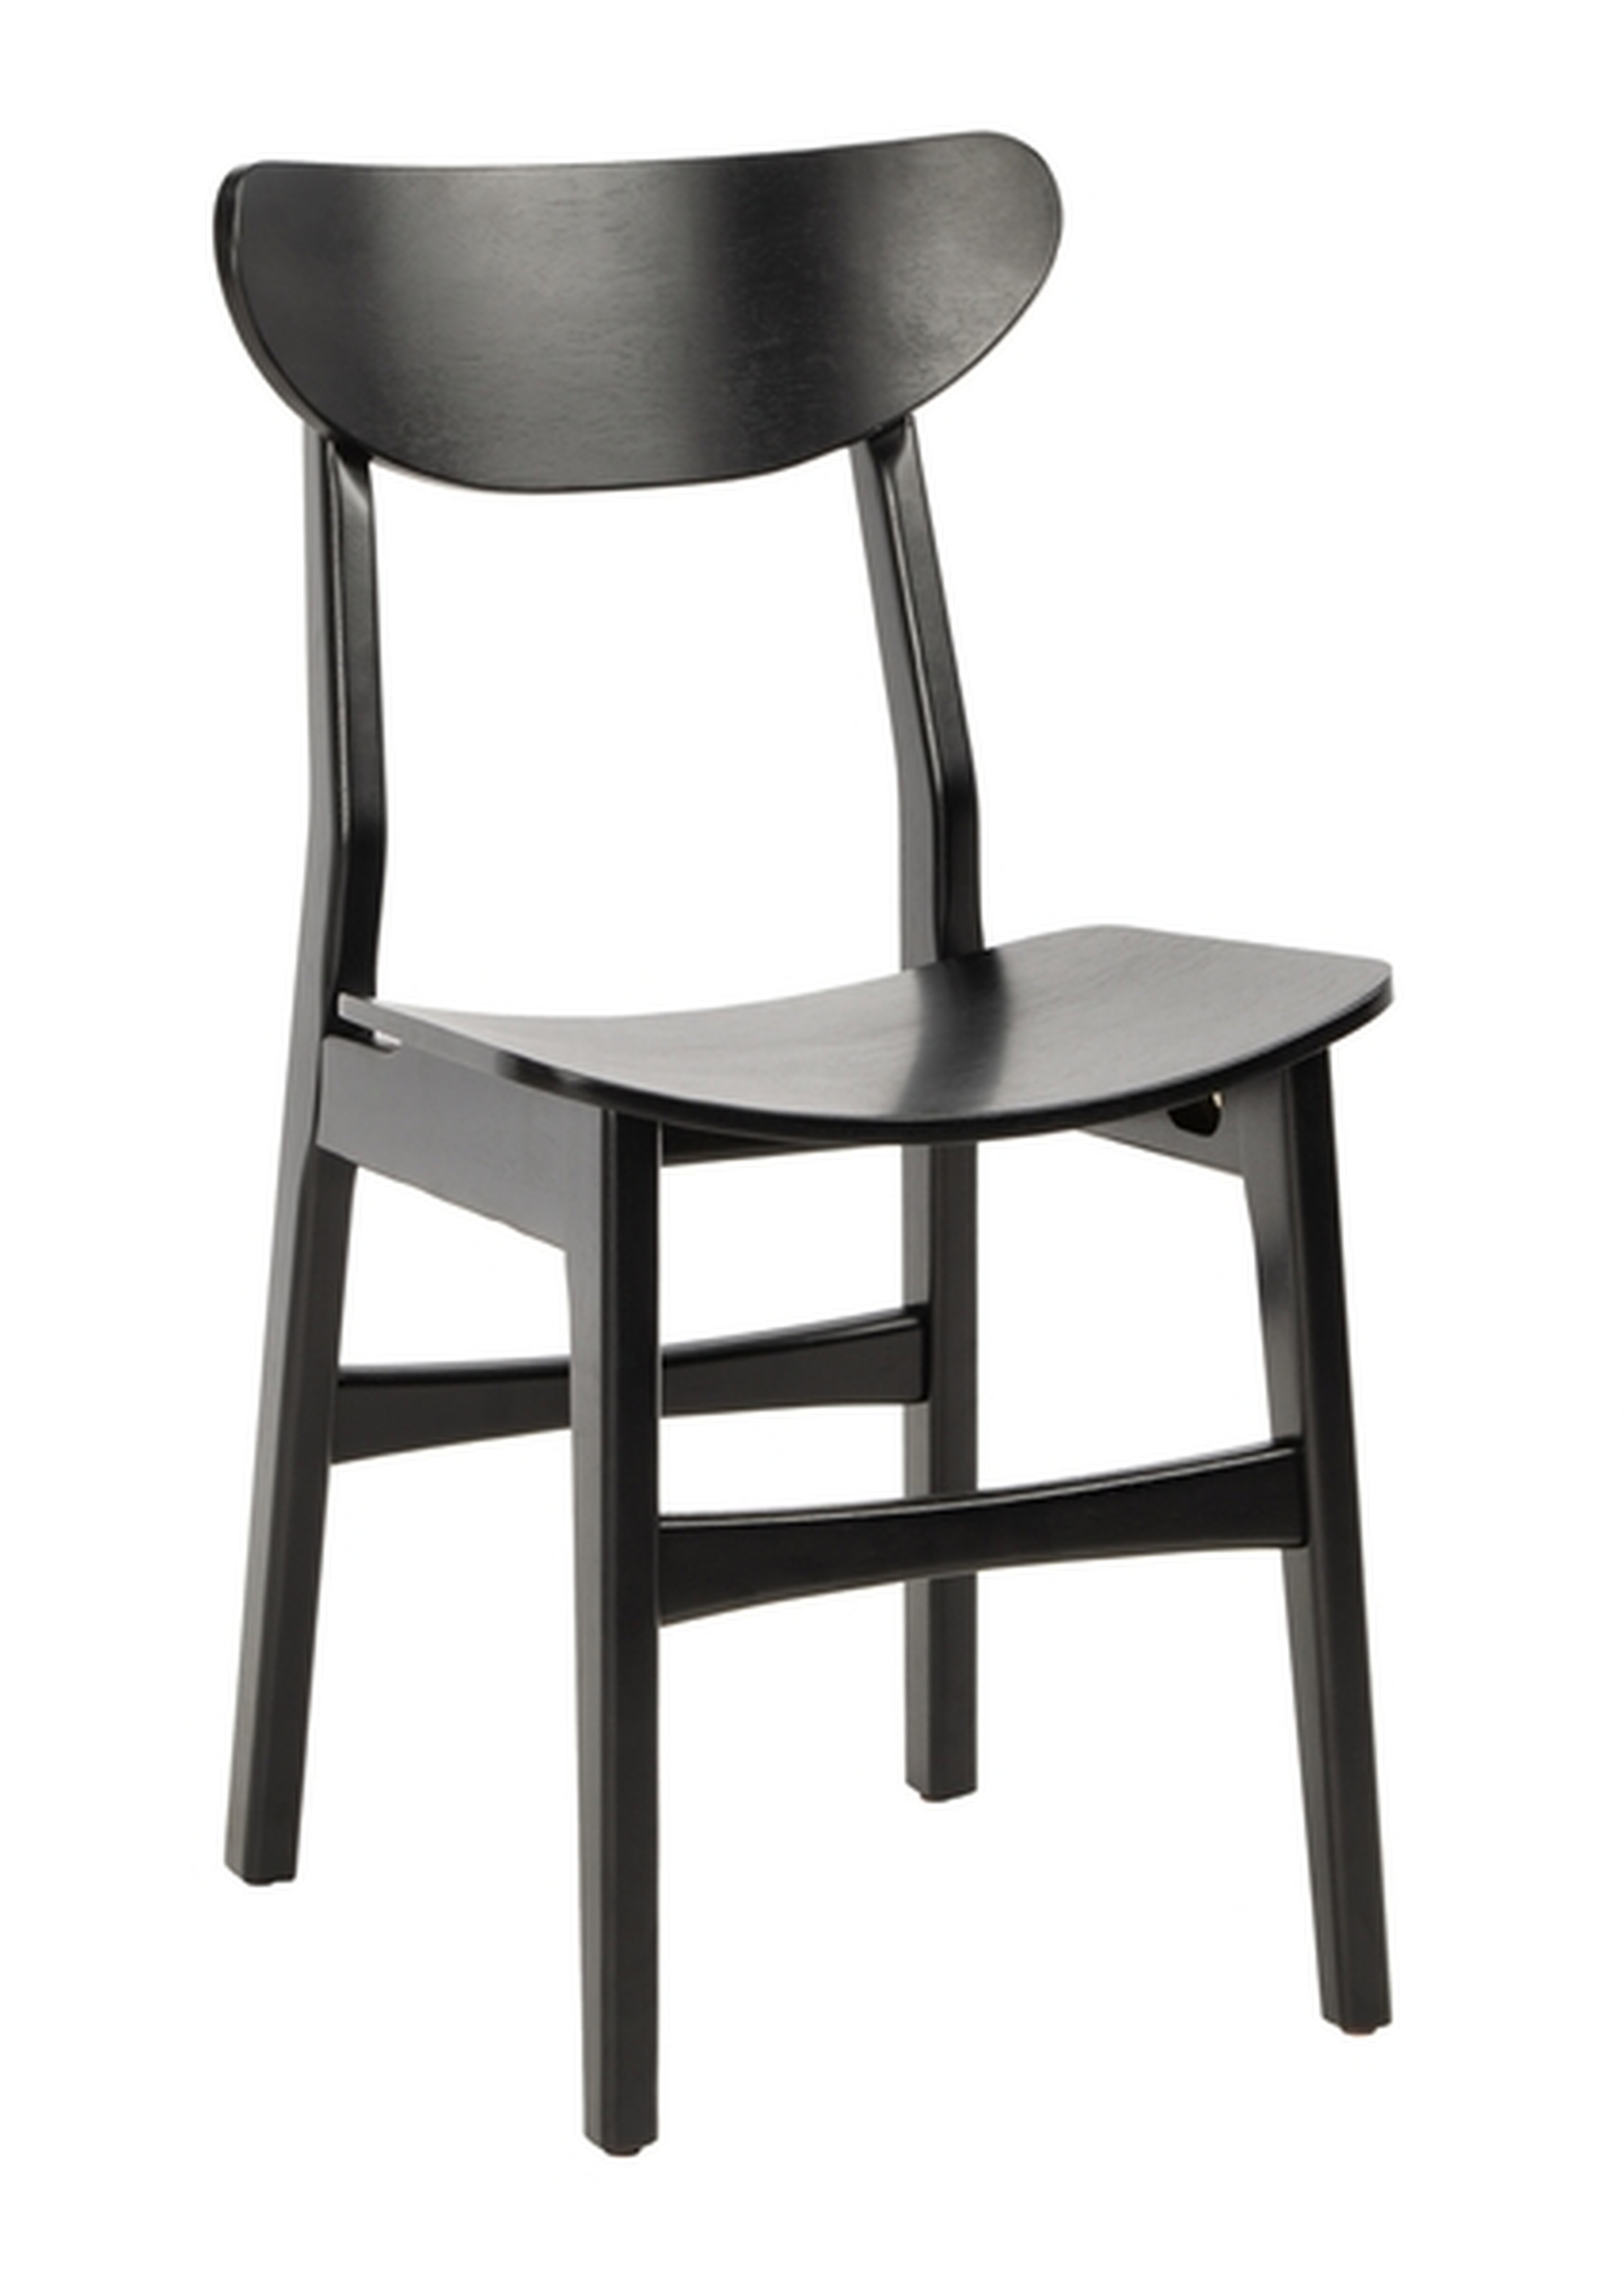 Lucca Retro Dining Chair - Black - Set of 2 - Arlo Home